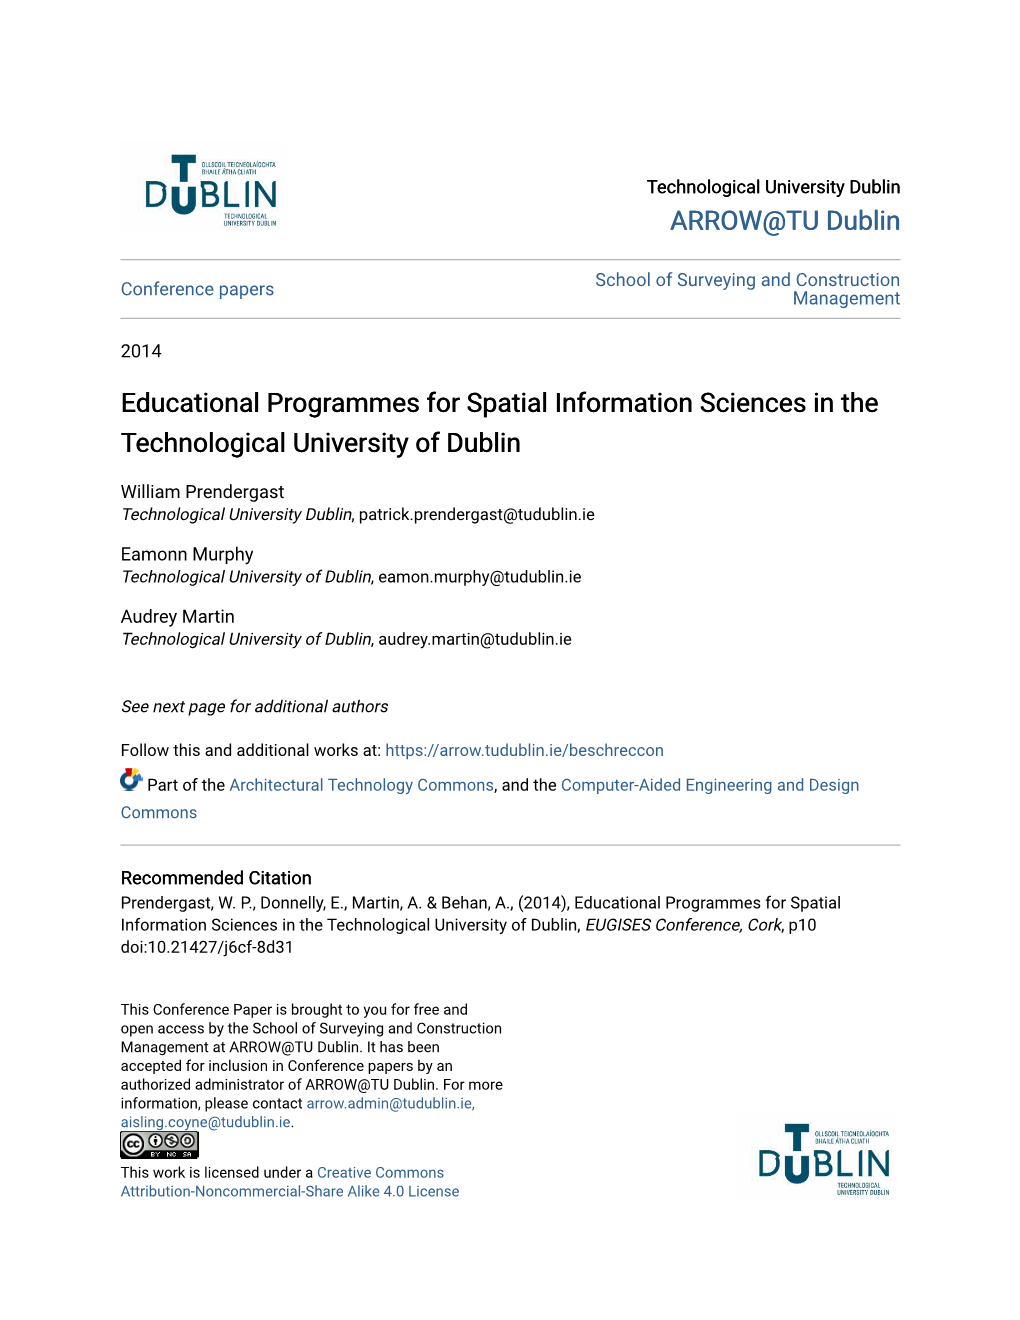 Educational Programmes for Spatial Information Sciences in the Technological University of Dublin